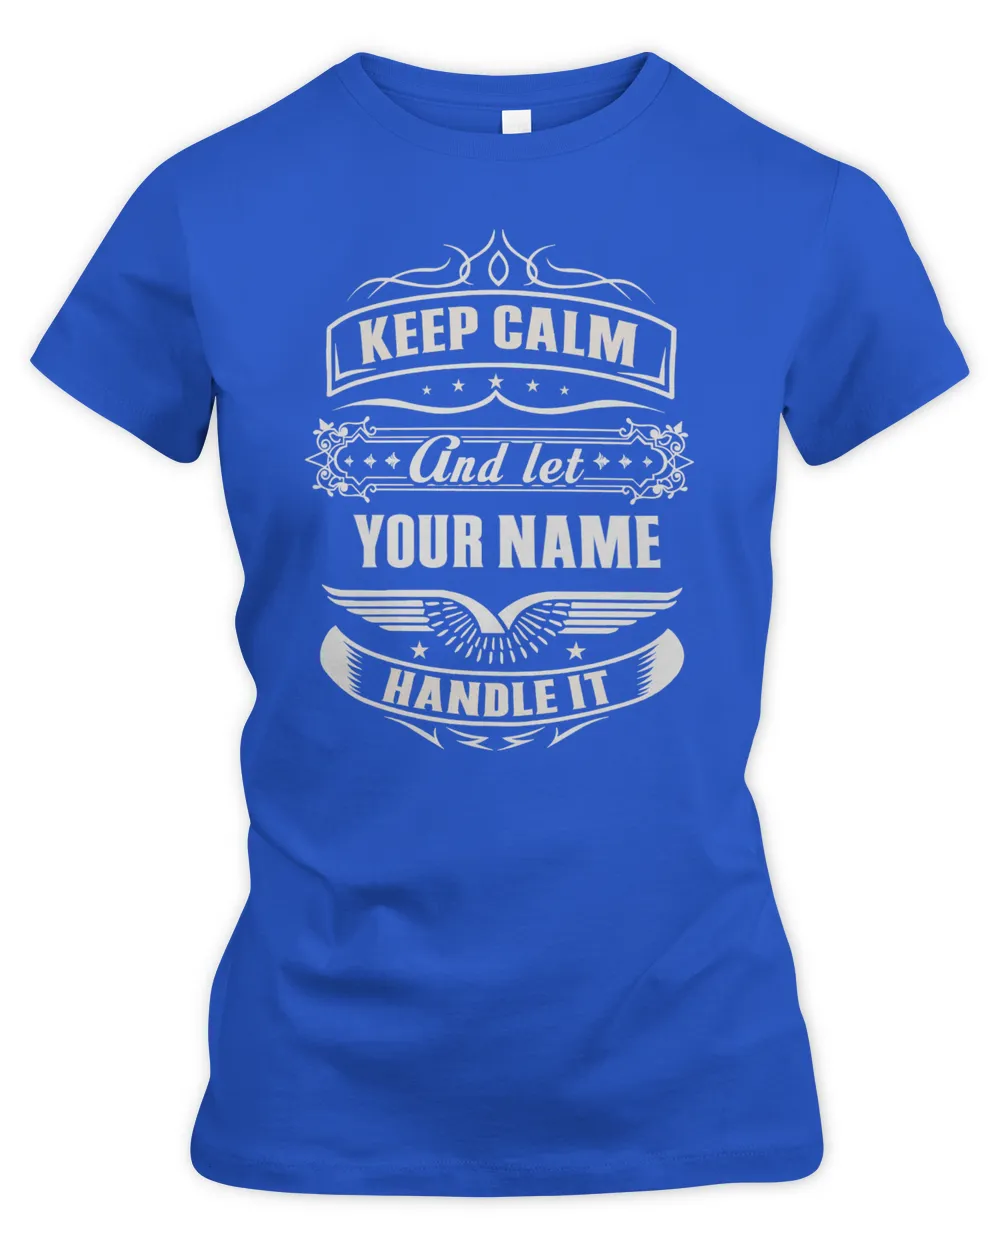 [Personalize] Keep calm and let